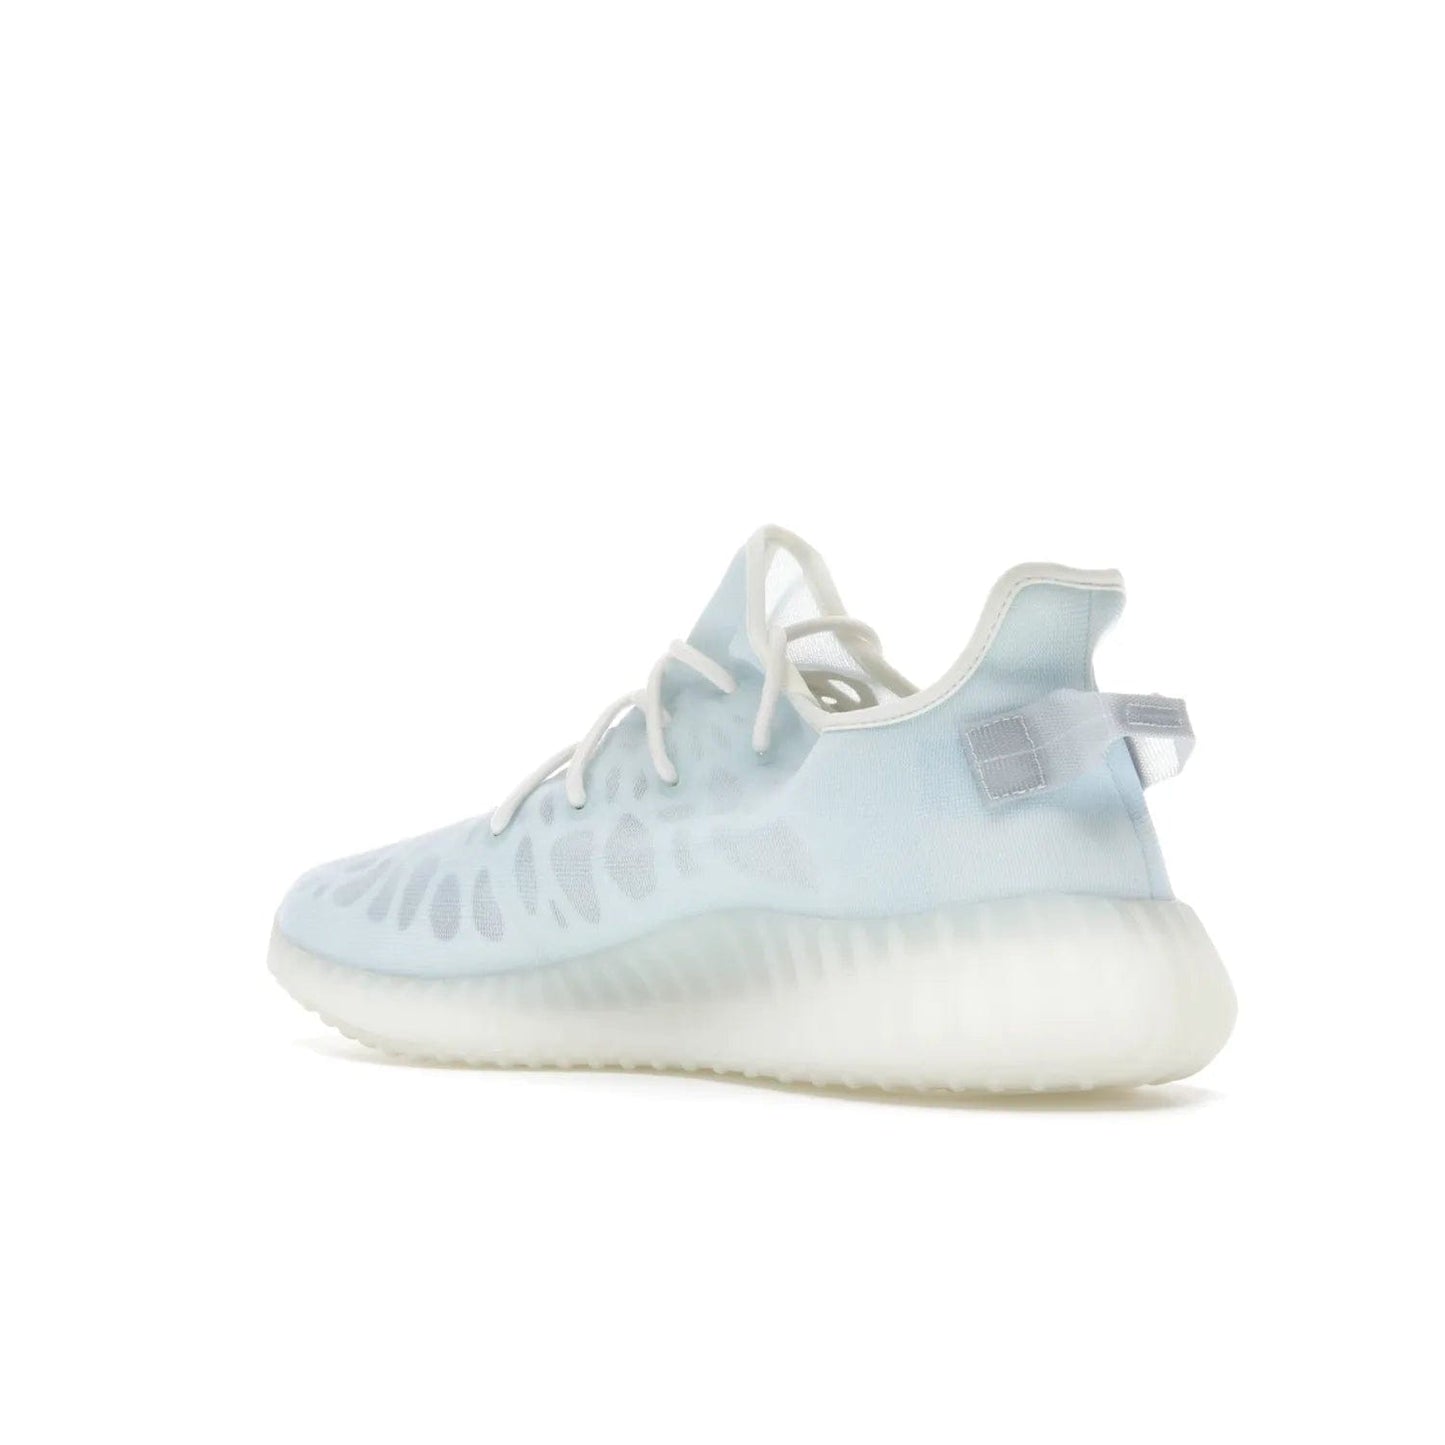 adidas Yeezy Boost 350 V2 Mono Ice - Image 23 - Only at www.BallersClubKickz.com - Introducing the adidas Yeezy 350 V2 Mono Ice - a sleek monofilament mesh design in Ice blue with Boost sole and heel pull tab. Released exclusively in the US for $220.